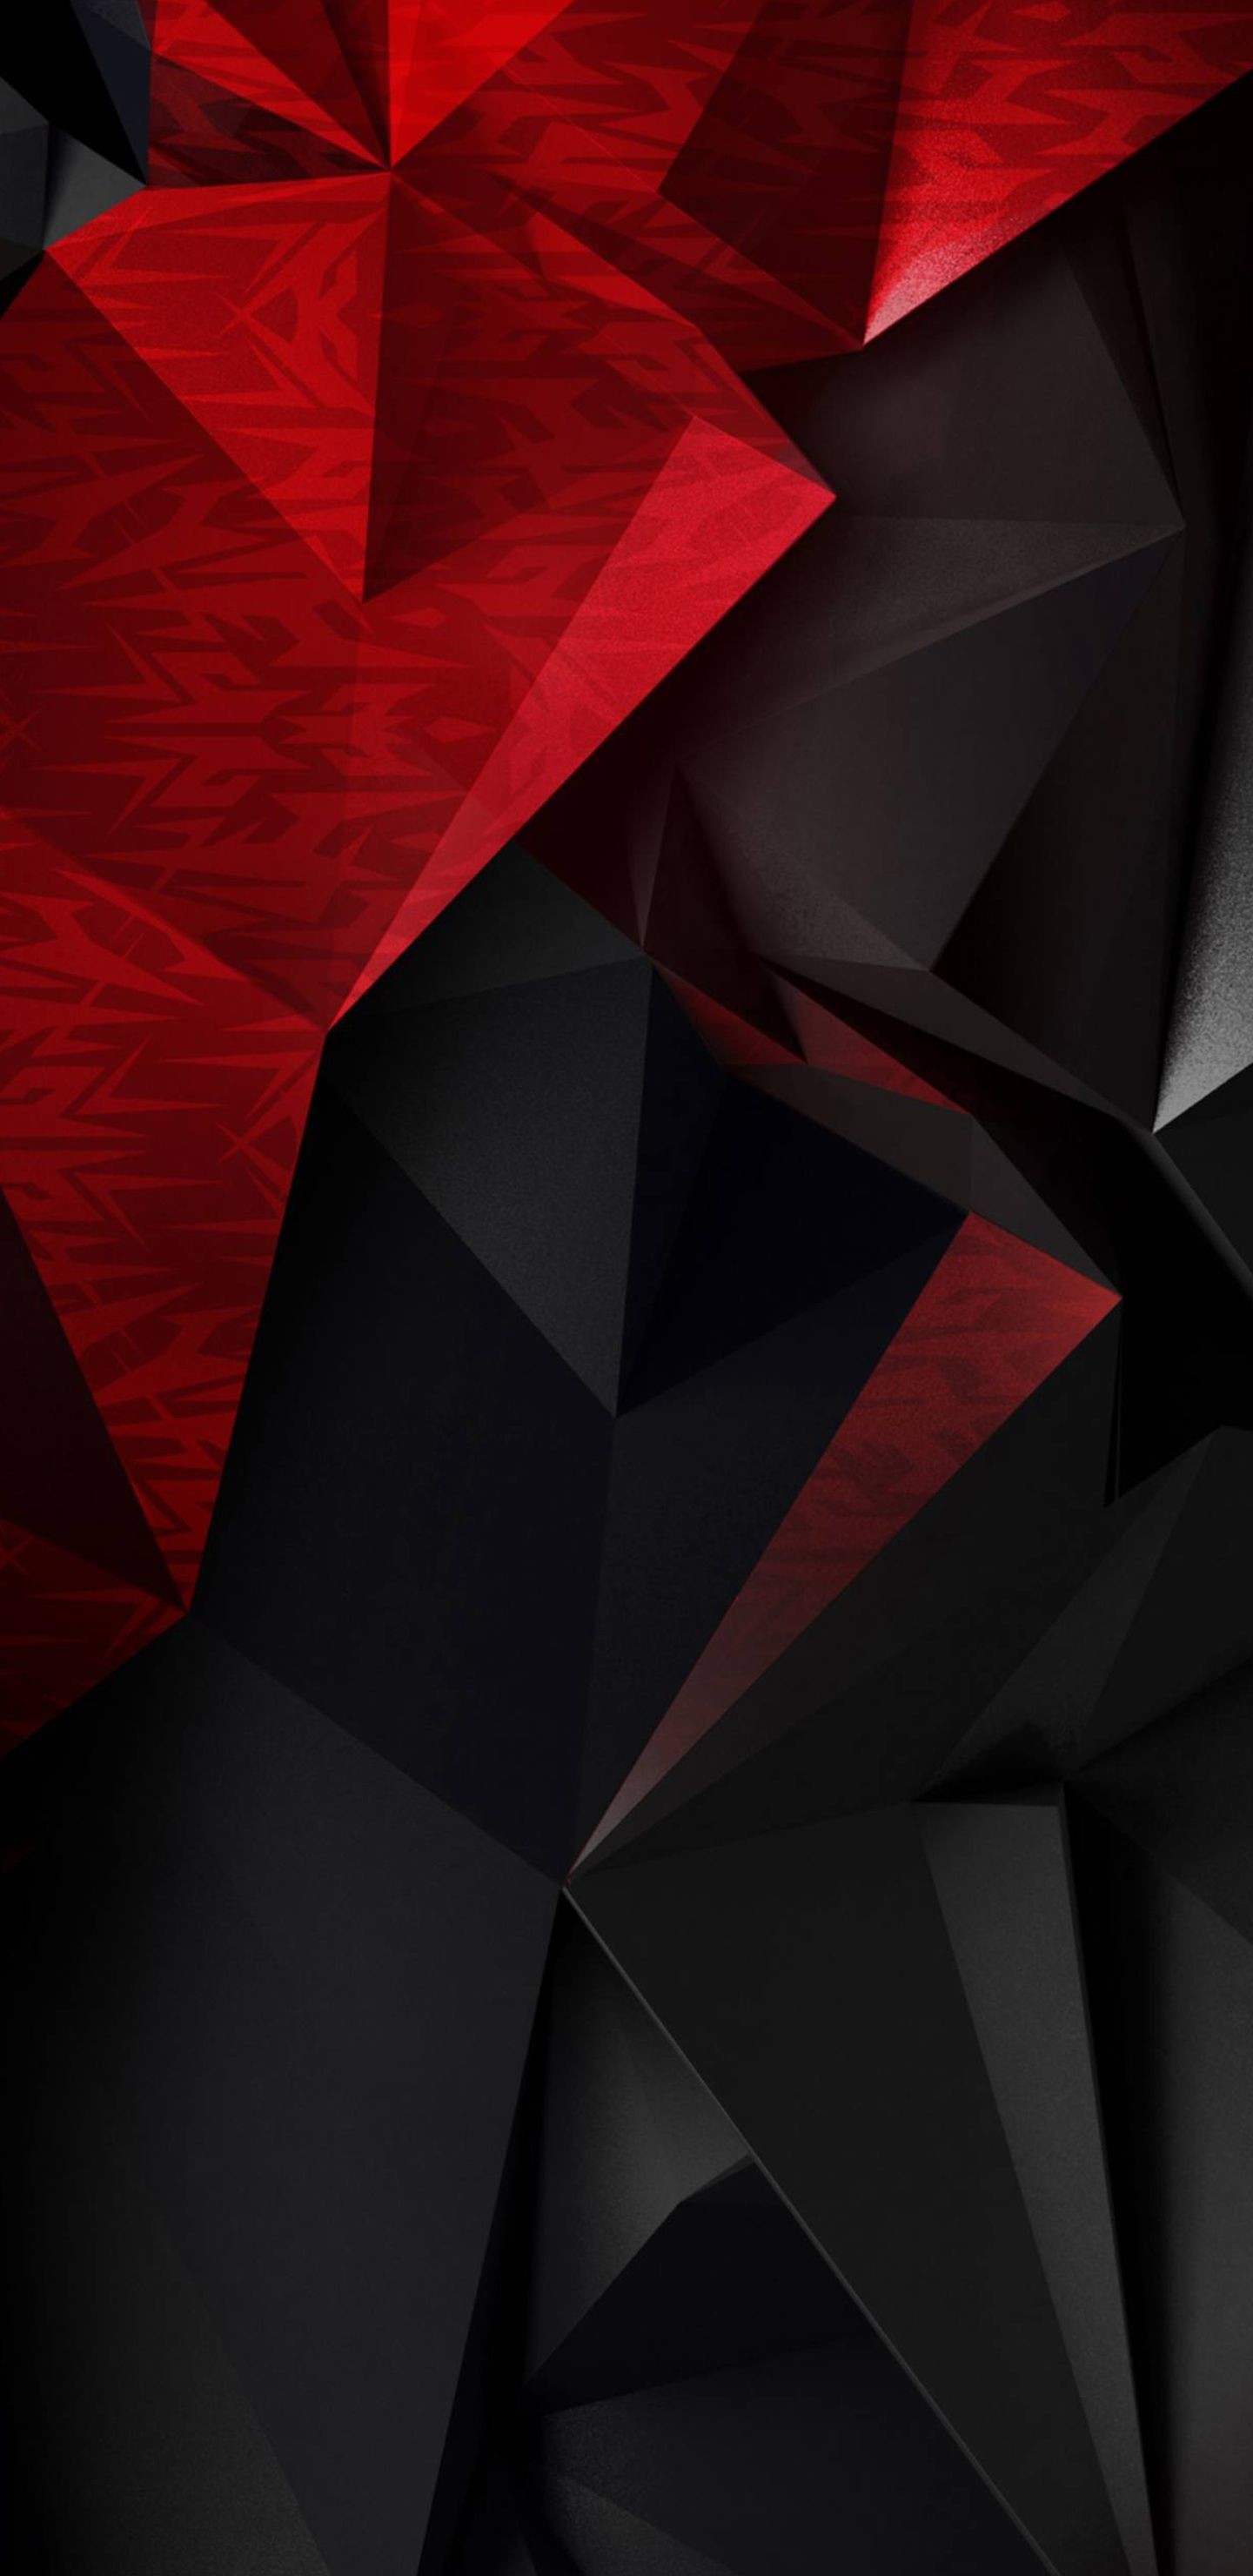 1440x2960 Abstract 3D Red and Black Polygons for Samsung Galaxy S9 Wallpaper